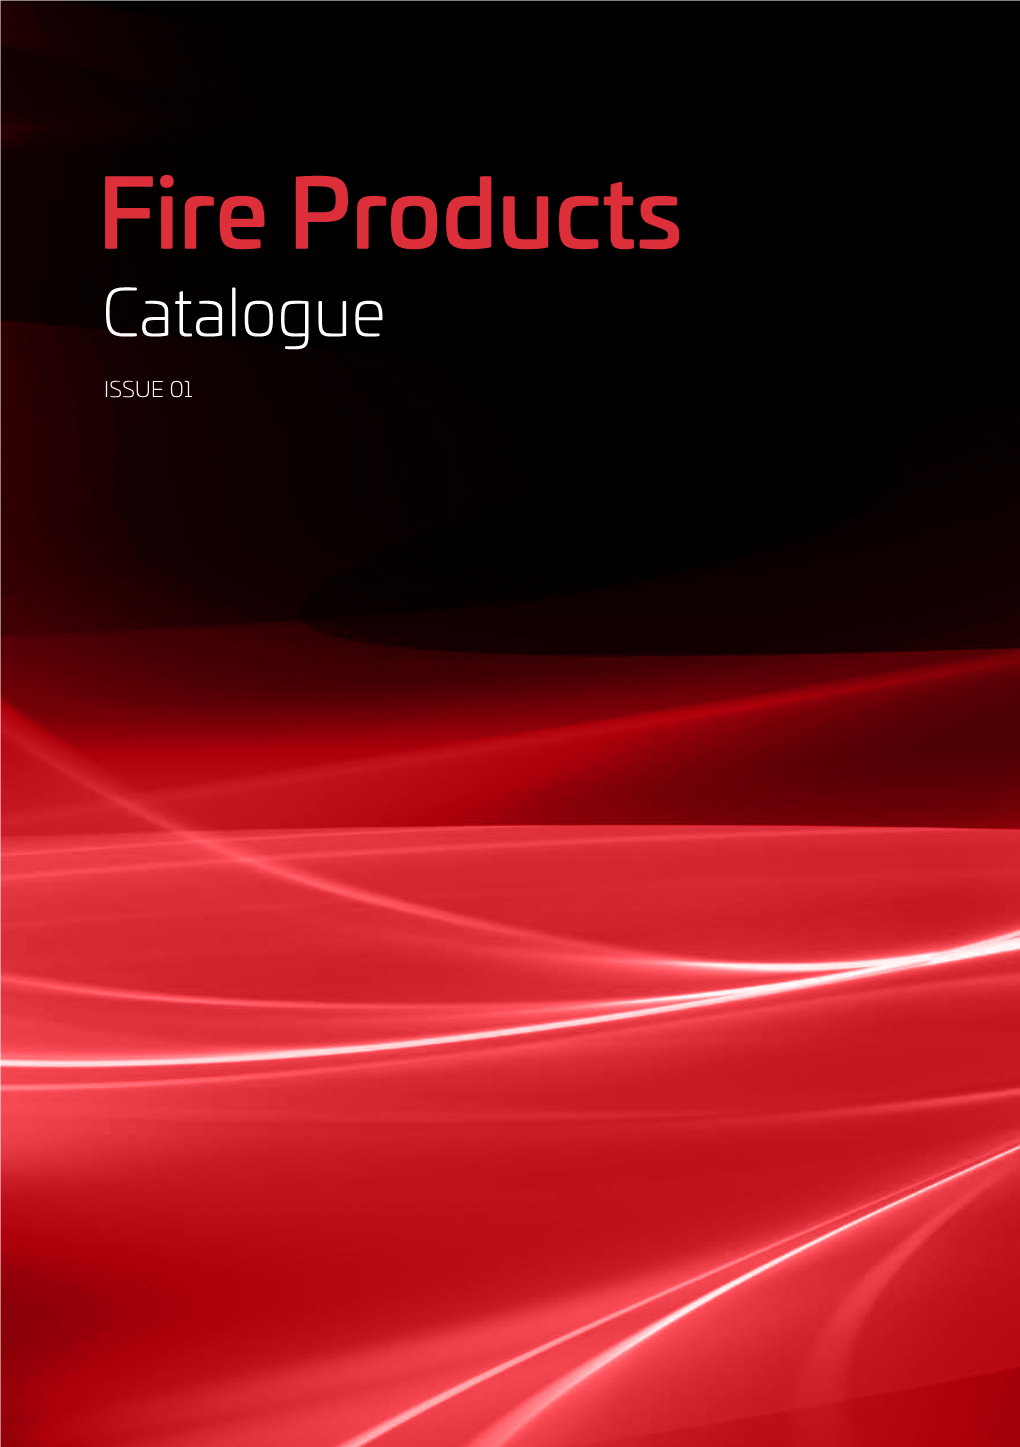 Fire Products Catalogue ISSUE 01